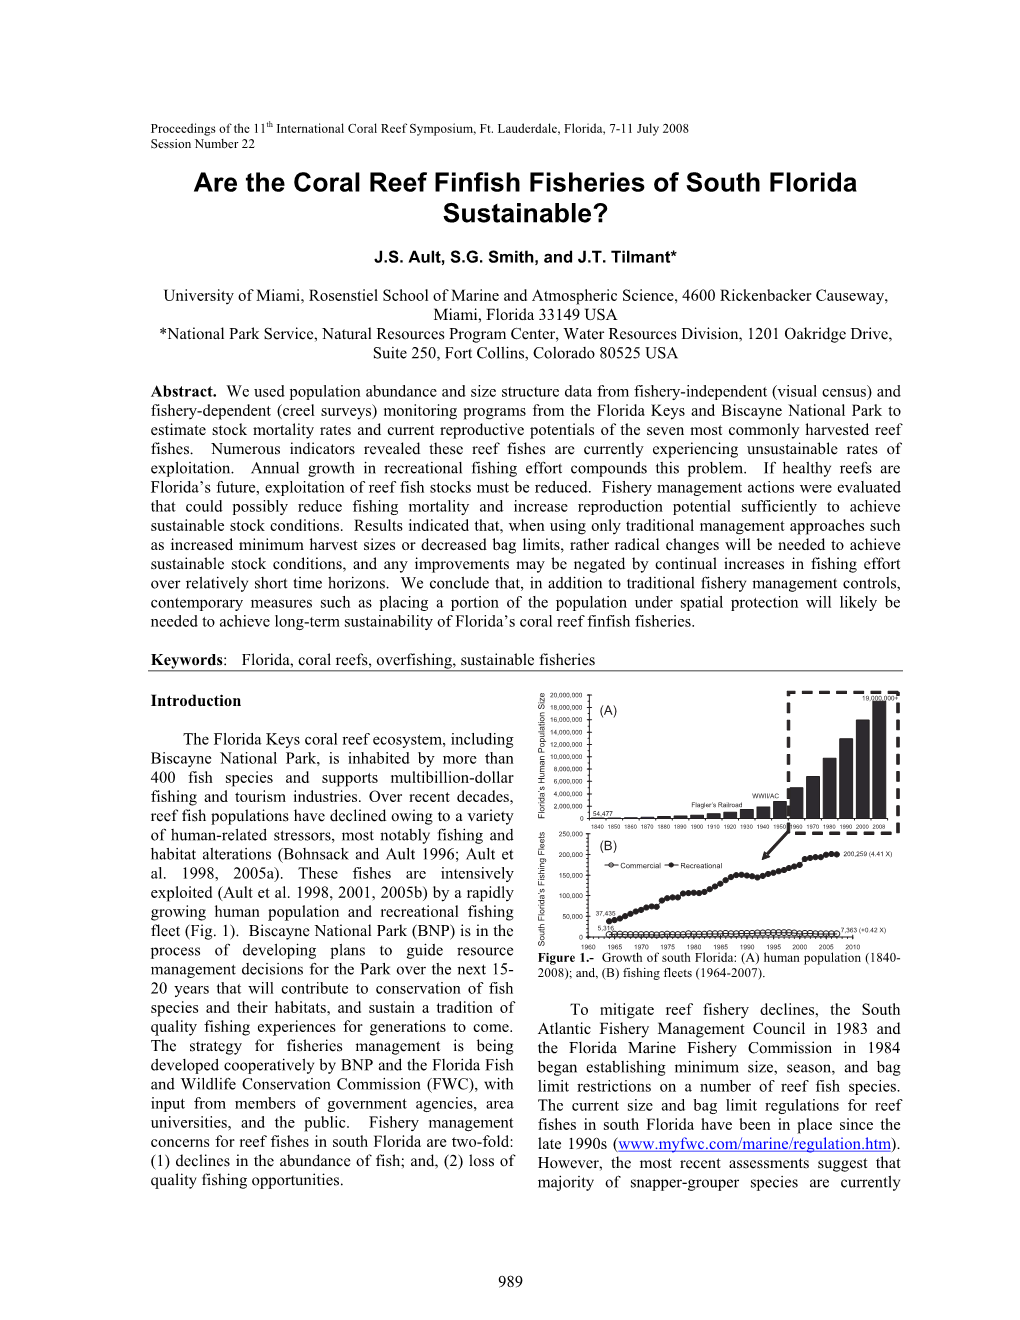 Are the Coral Reef Finfish Fisheries of South Florida Sustainable?